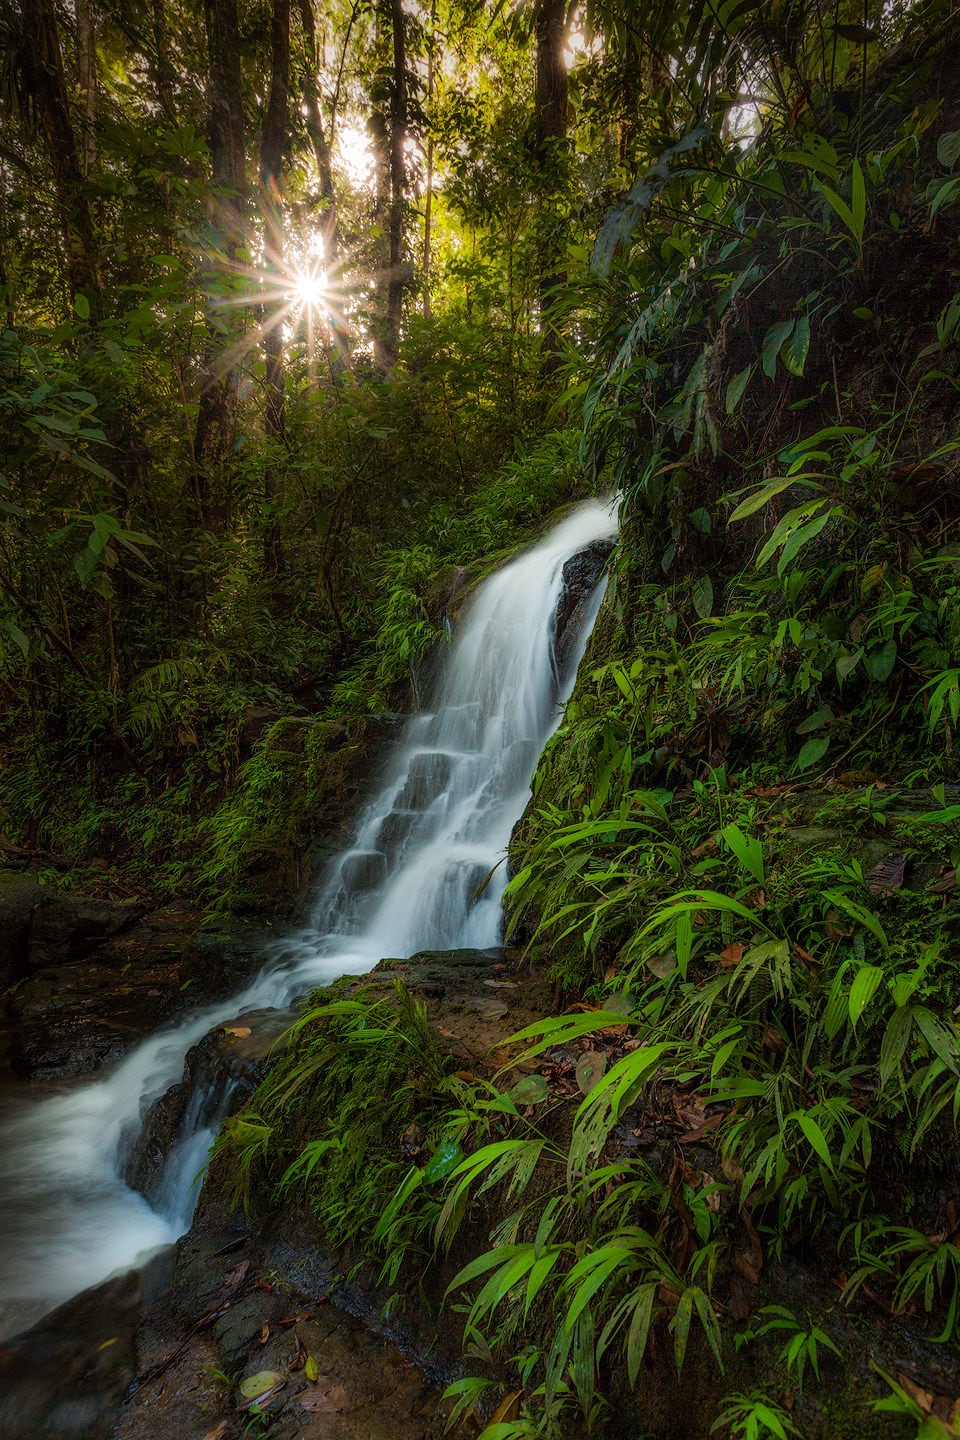 A small waterfall in the jungle.